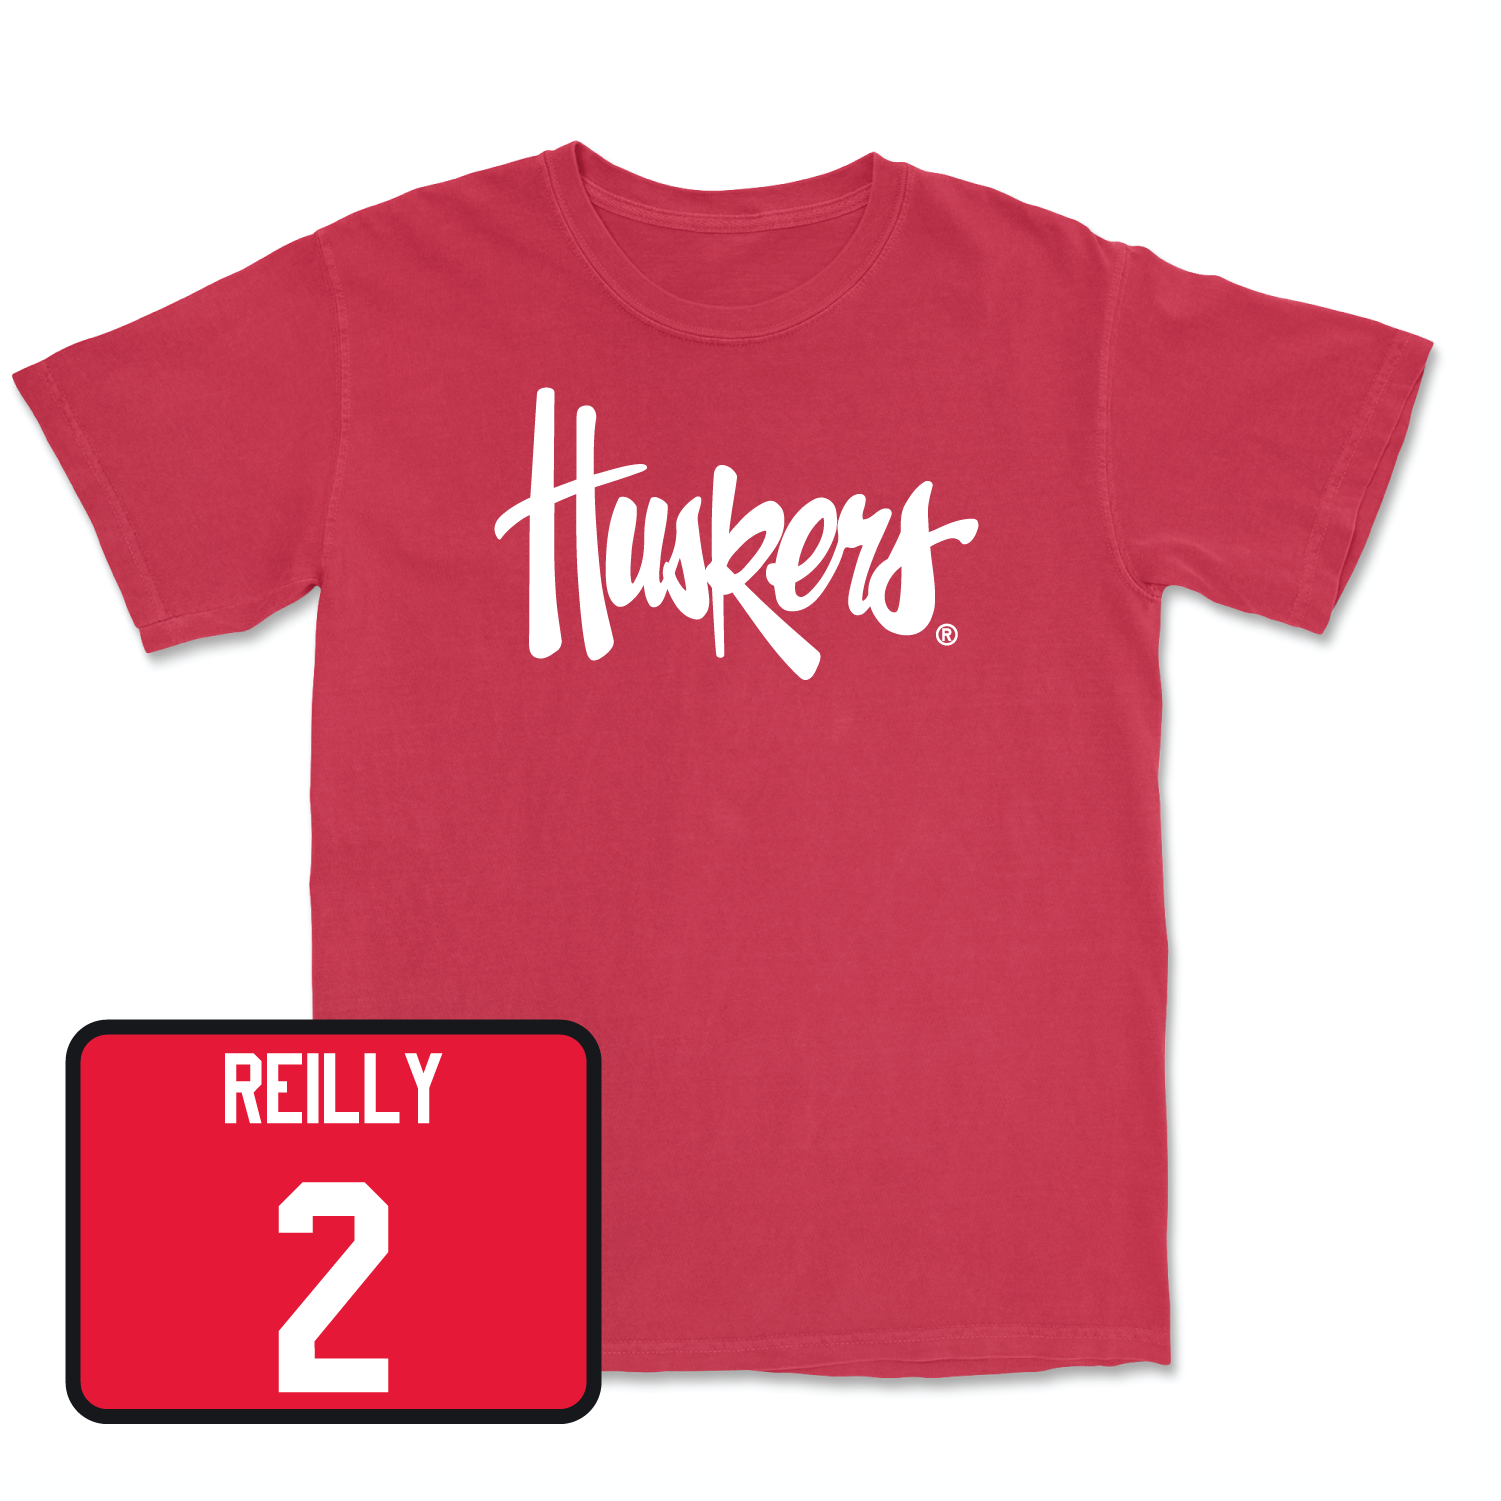 Red Women's Volleyball Huskers Tee Youth Medium / Bergen Reilly | #2